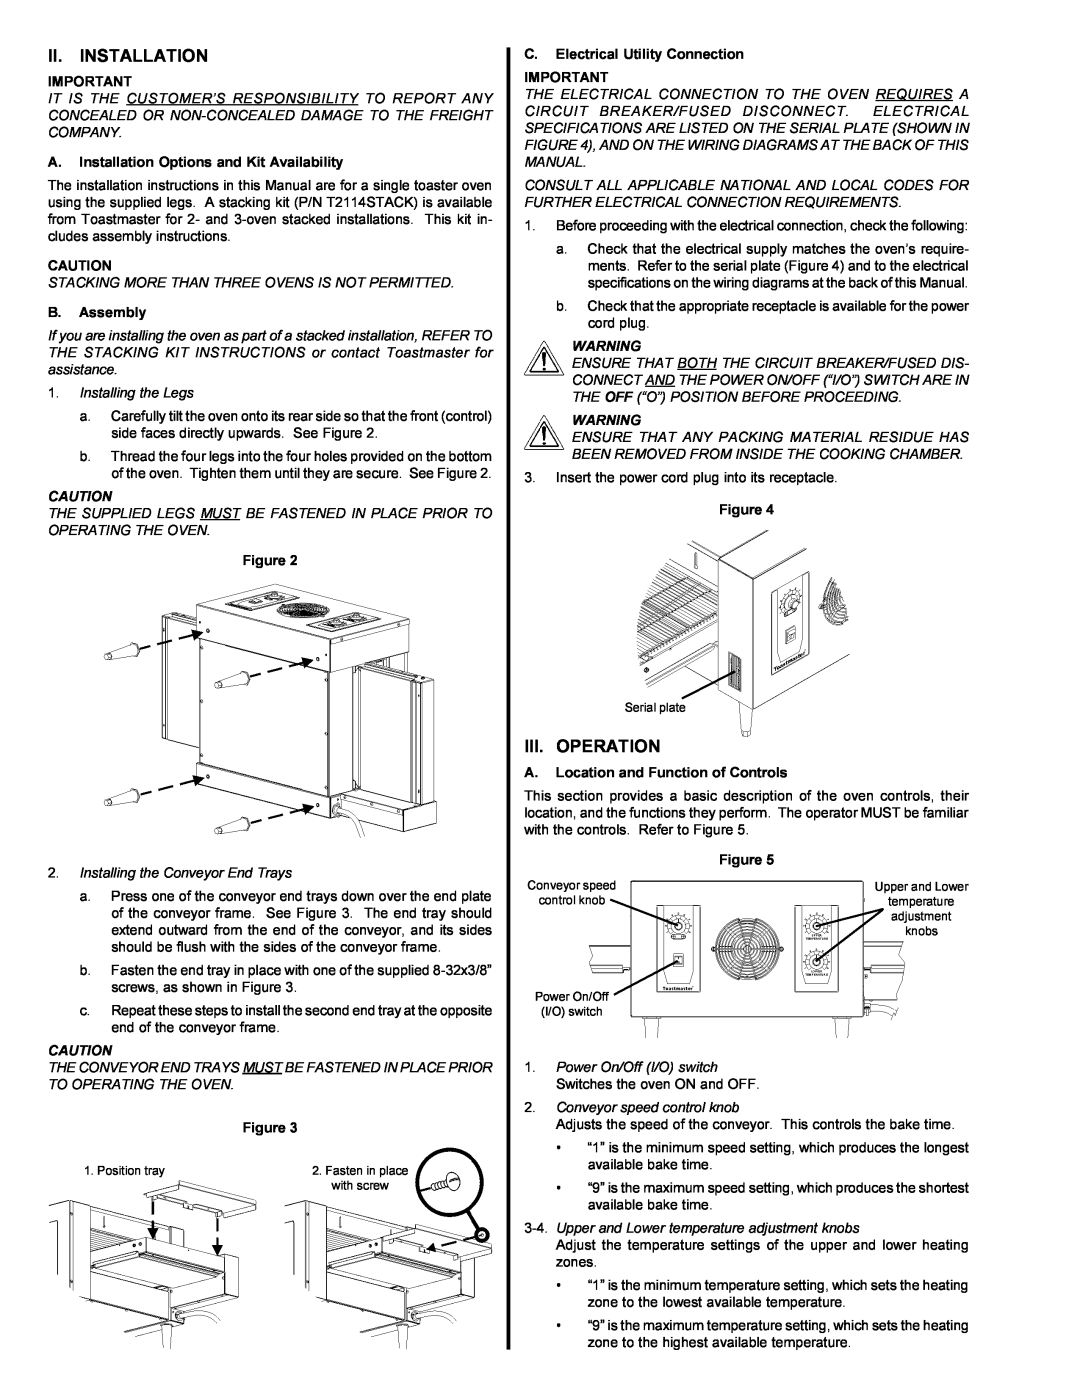 Toastmaster TC2000 Ii. Installation, Iii. Operation, A.Installation Options and Kit Availability, B.Assembly 